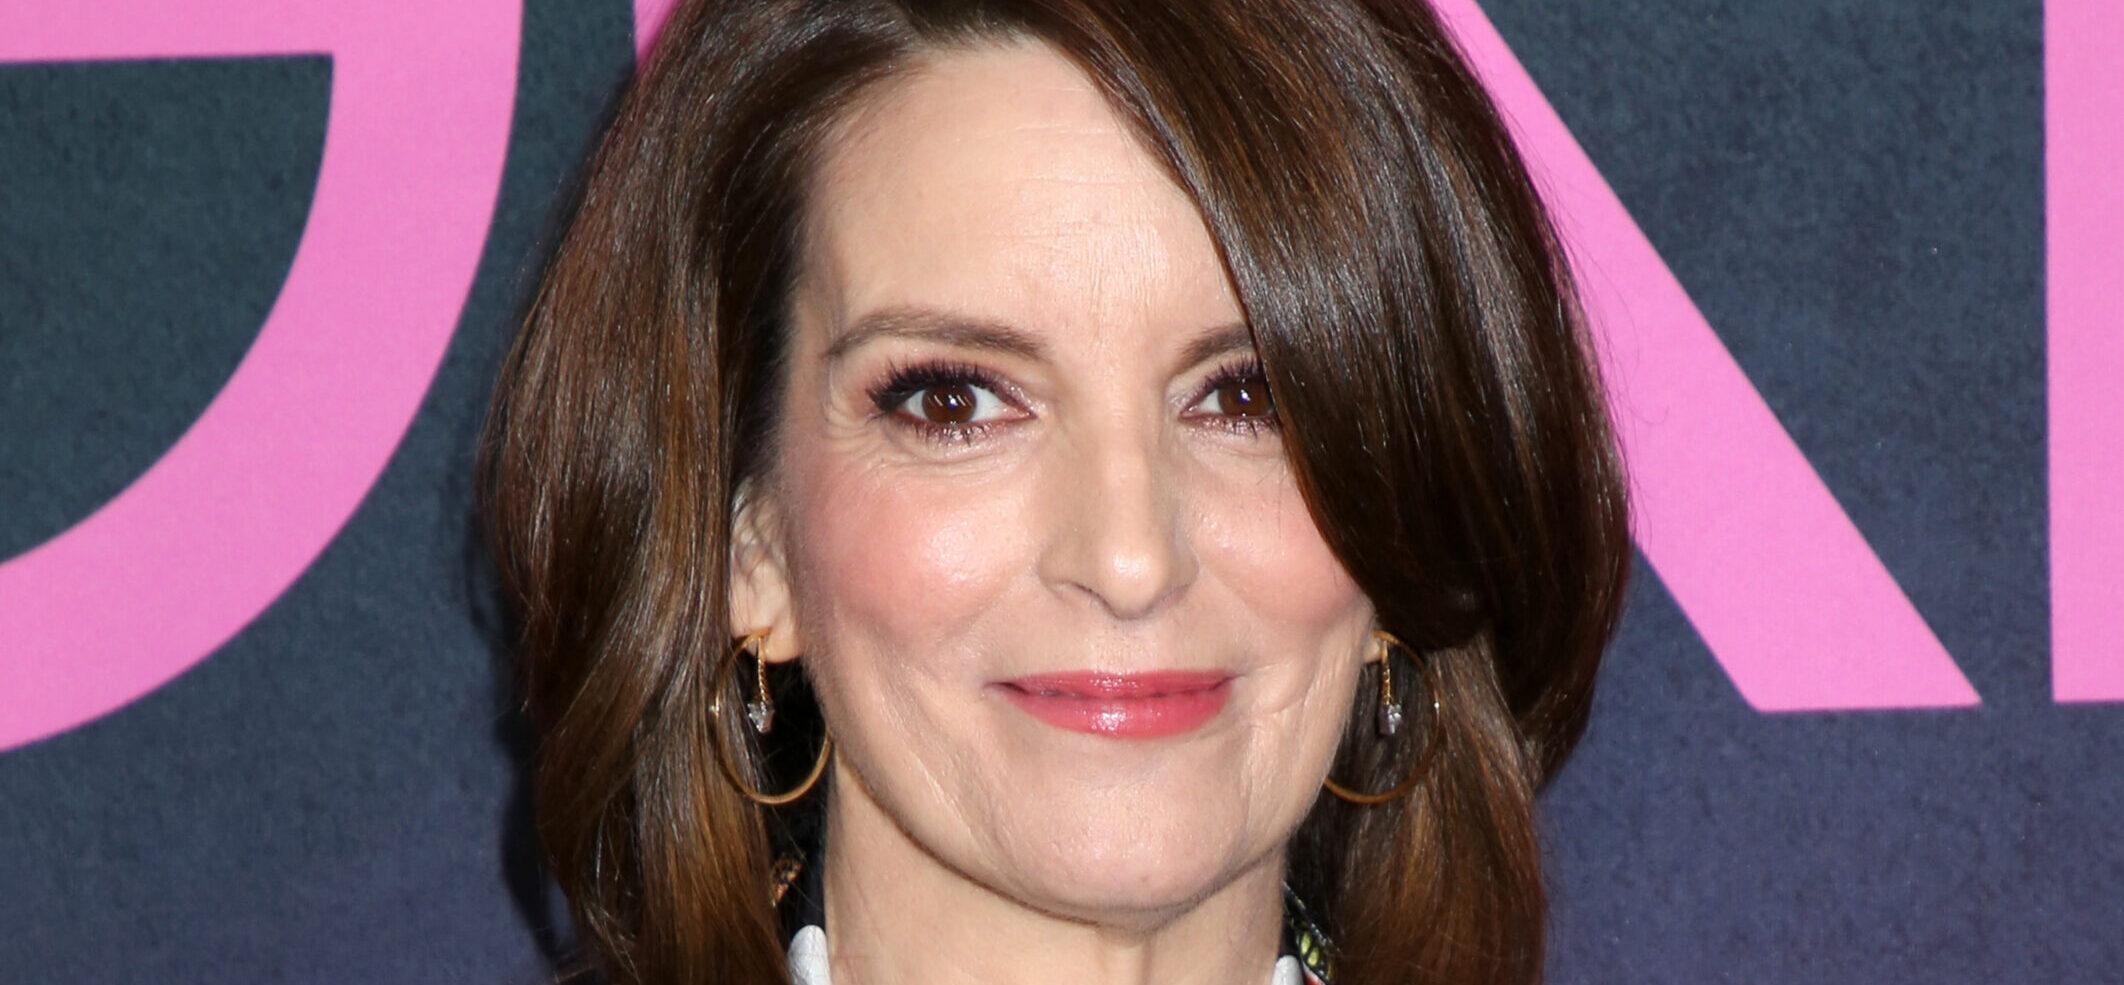 Tina Fey Had One Condition When Agreeing To Reprise ‘Mean Girls’ Role